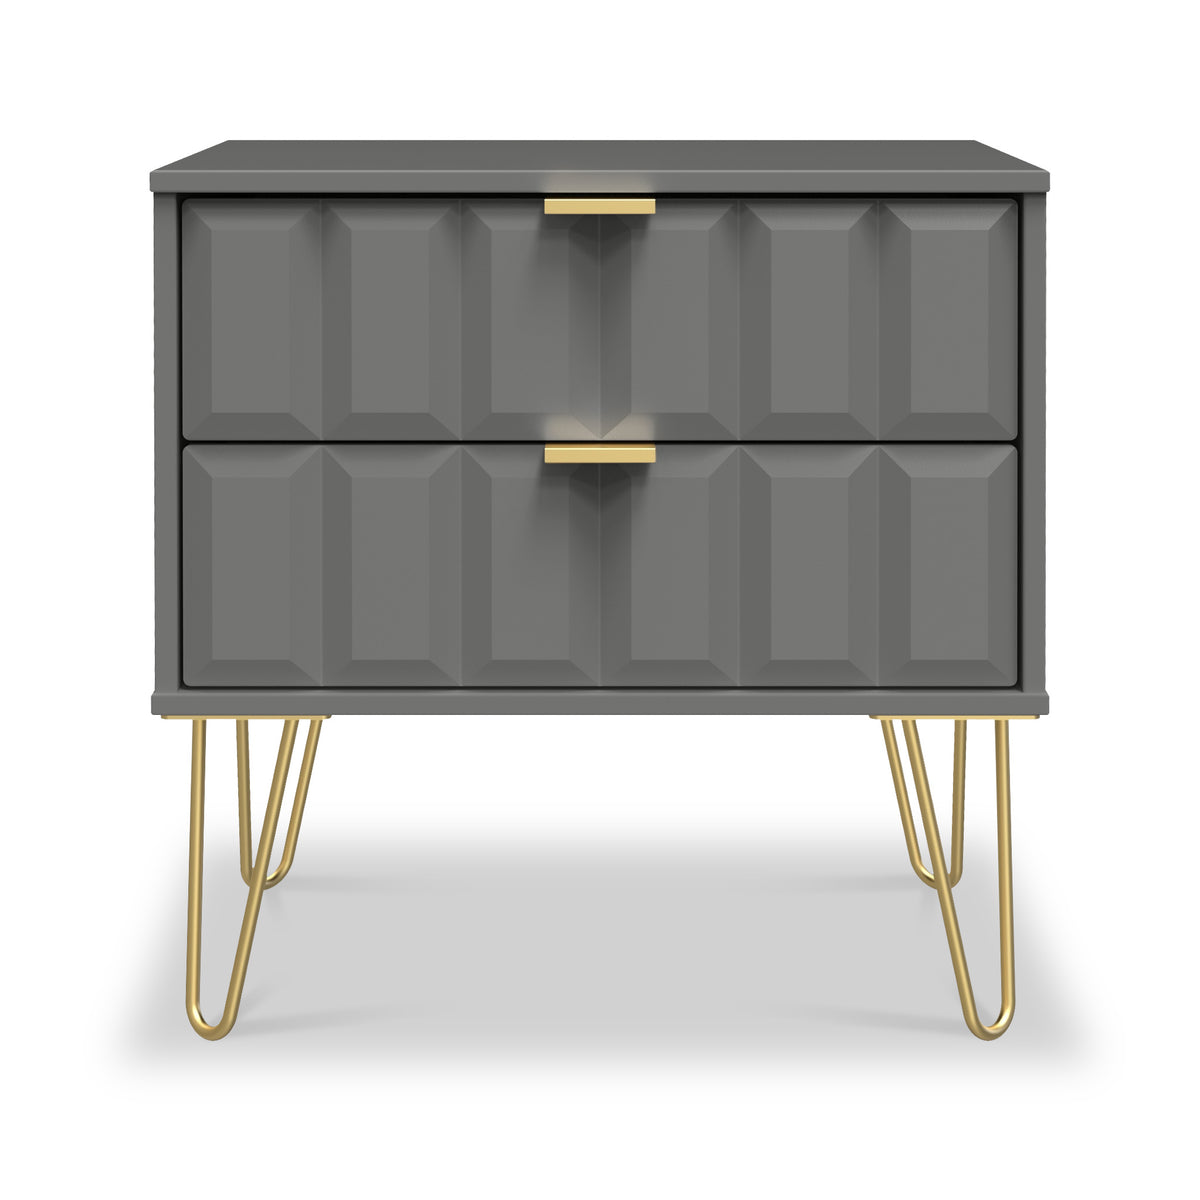 Harlow Grey 2 Drawer Utility Chest with Gold Hairpin Legs